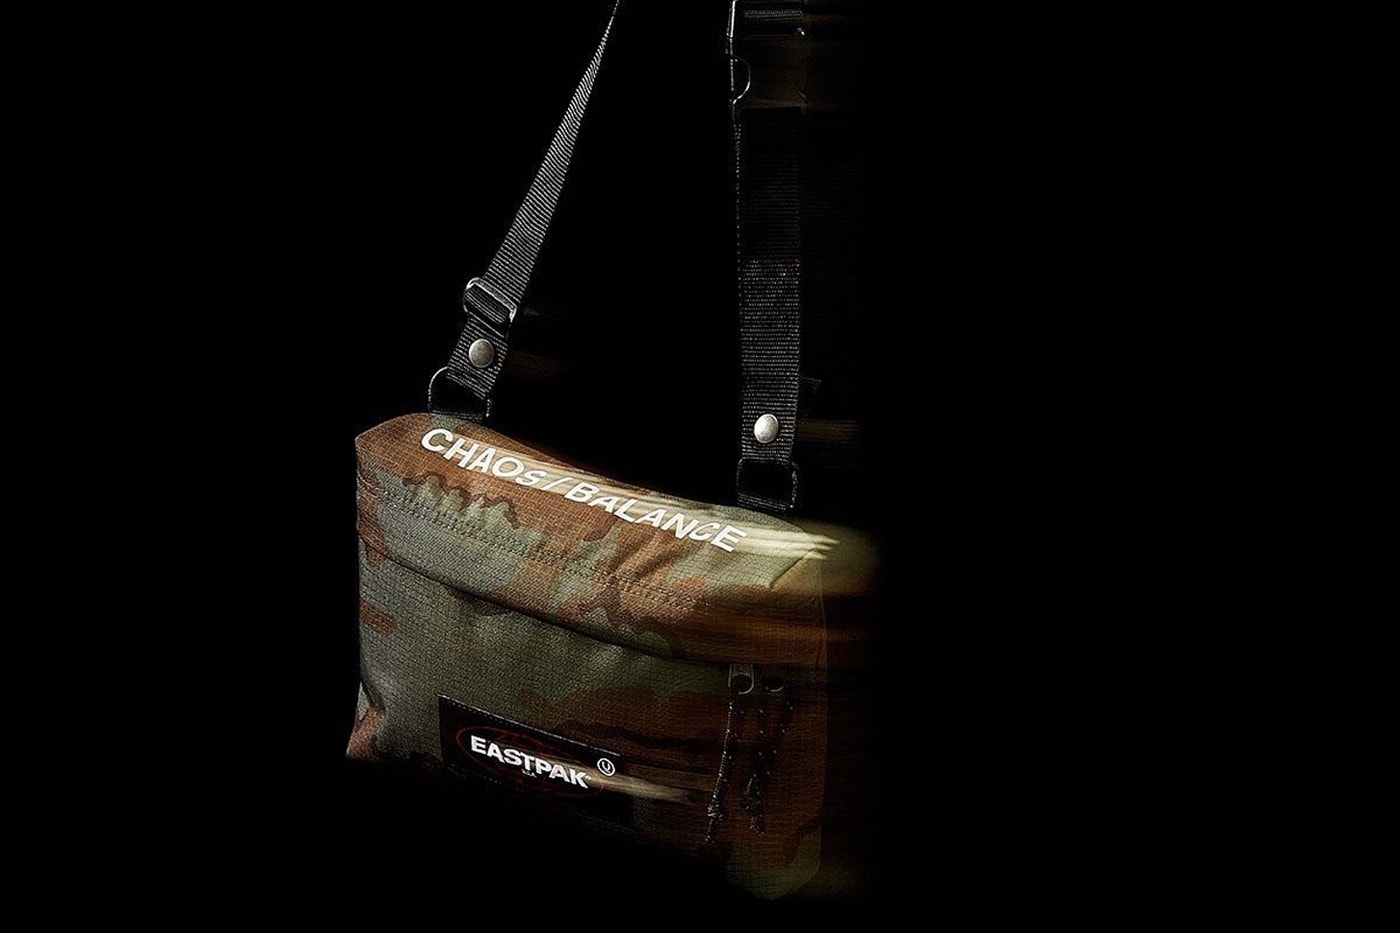 eastpak undercover chaos balance bags collaboration release info